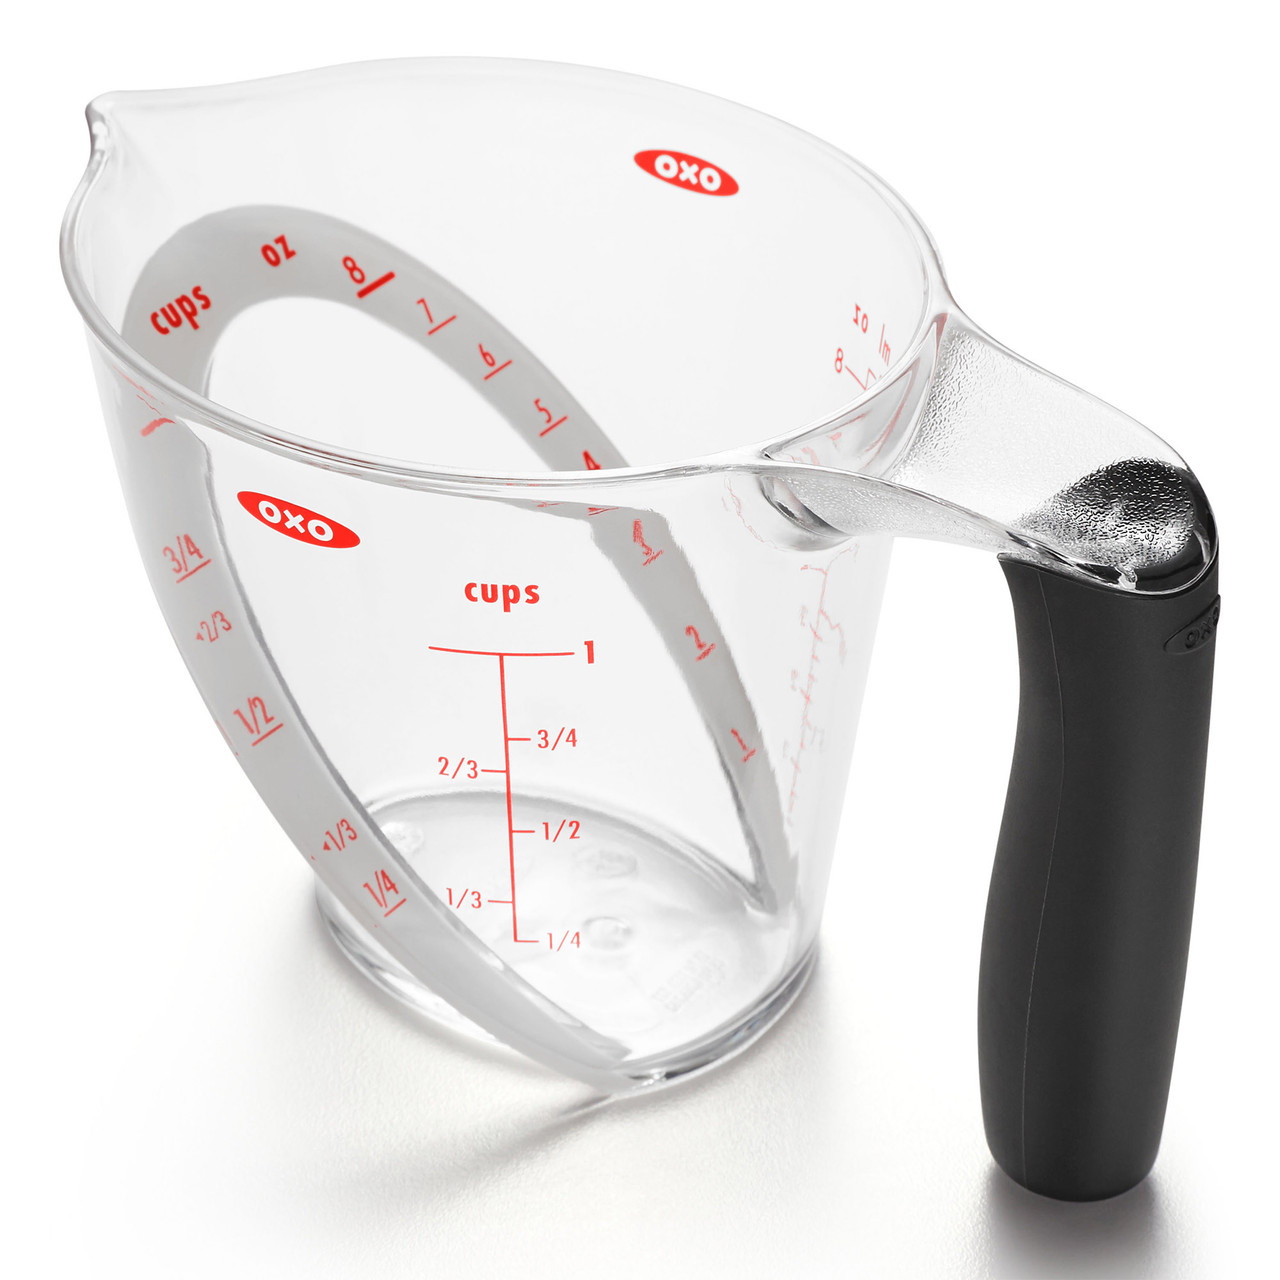 OXO GG Angled Measure Cup - 1 CUP/ 237ML